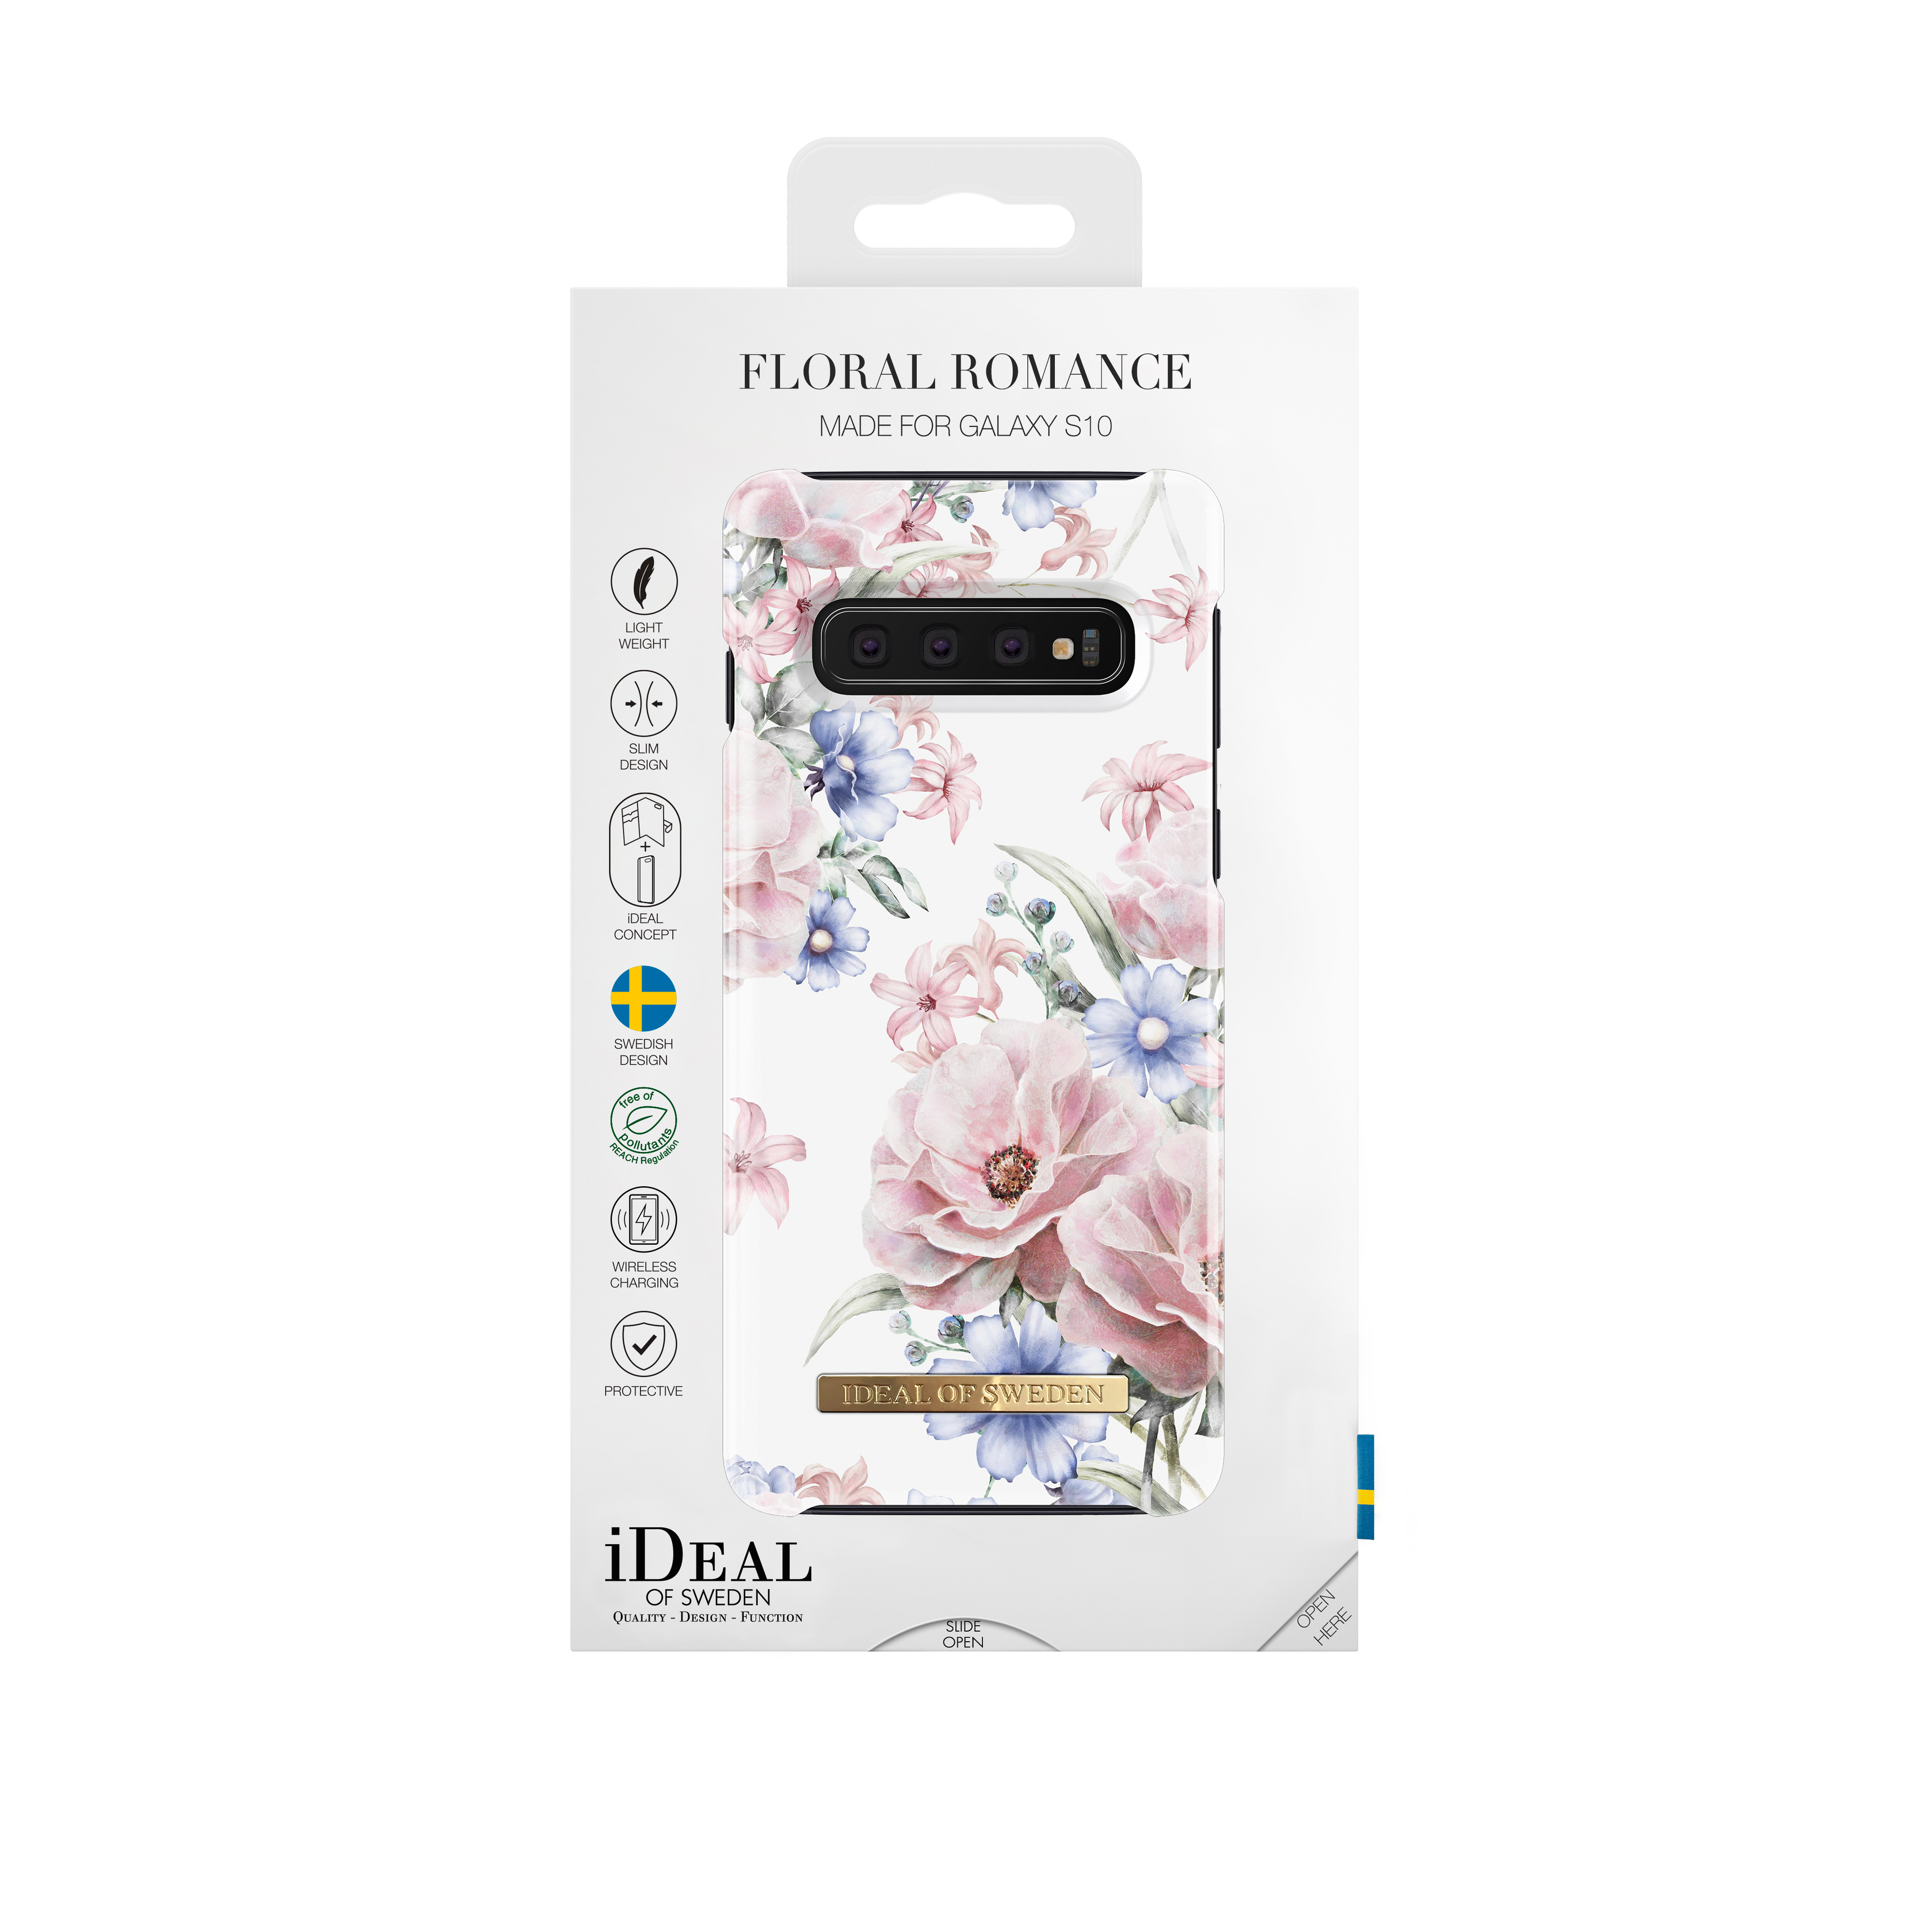 IDEAL OF Backcover, SWEDEN Fashion, Floral Romance Galaxy S10, Samsung